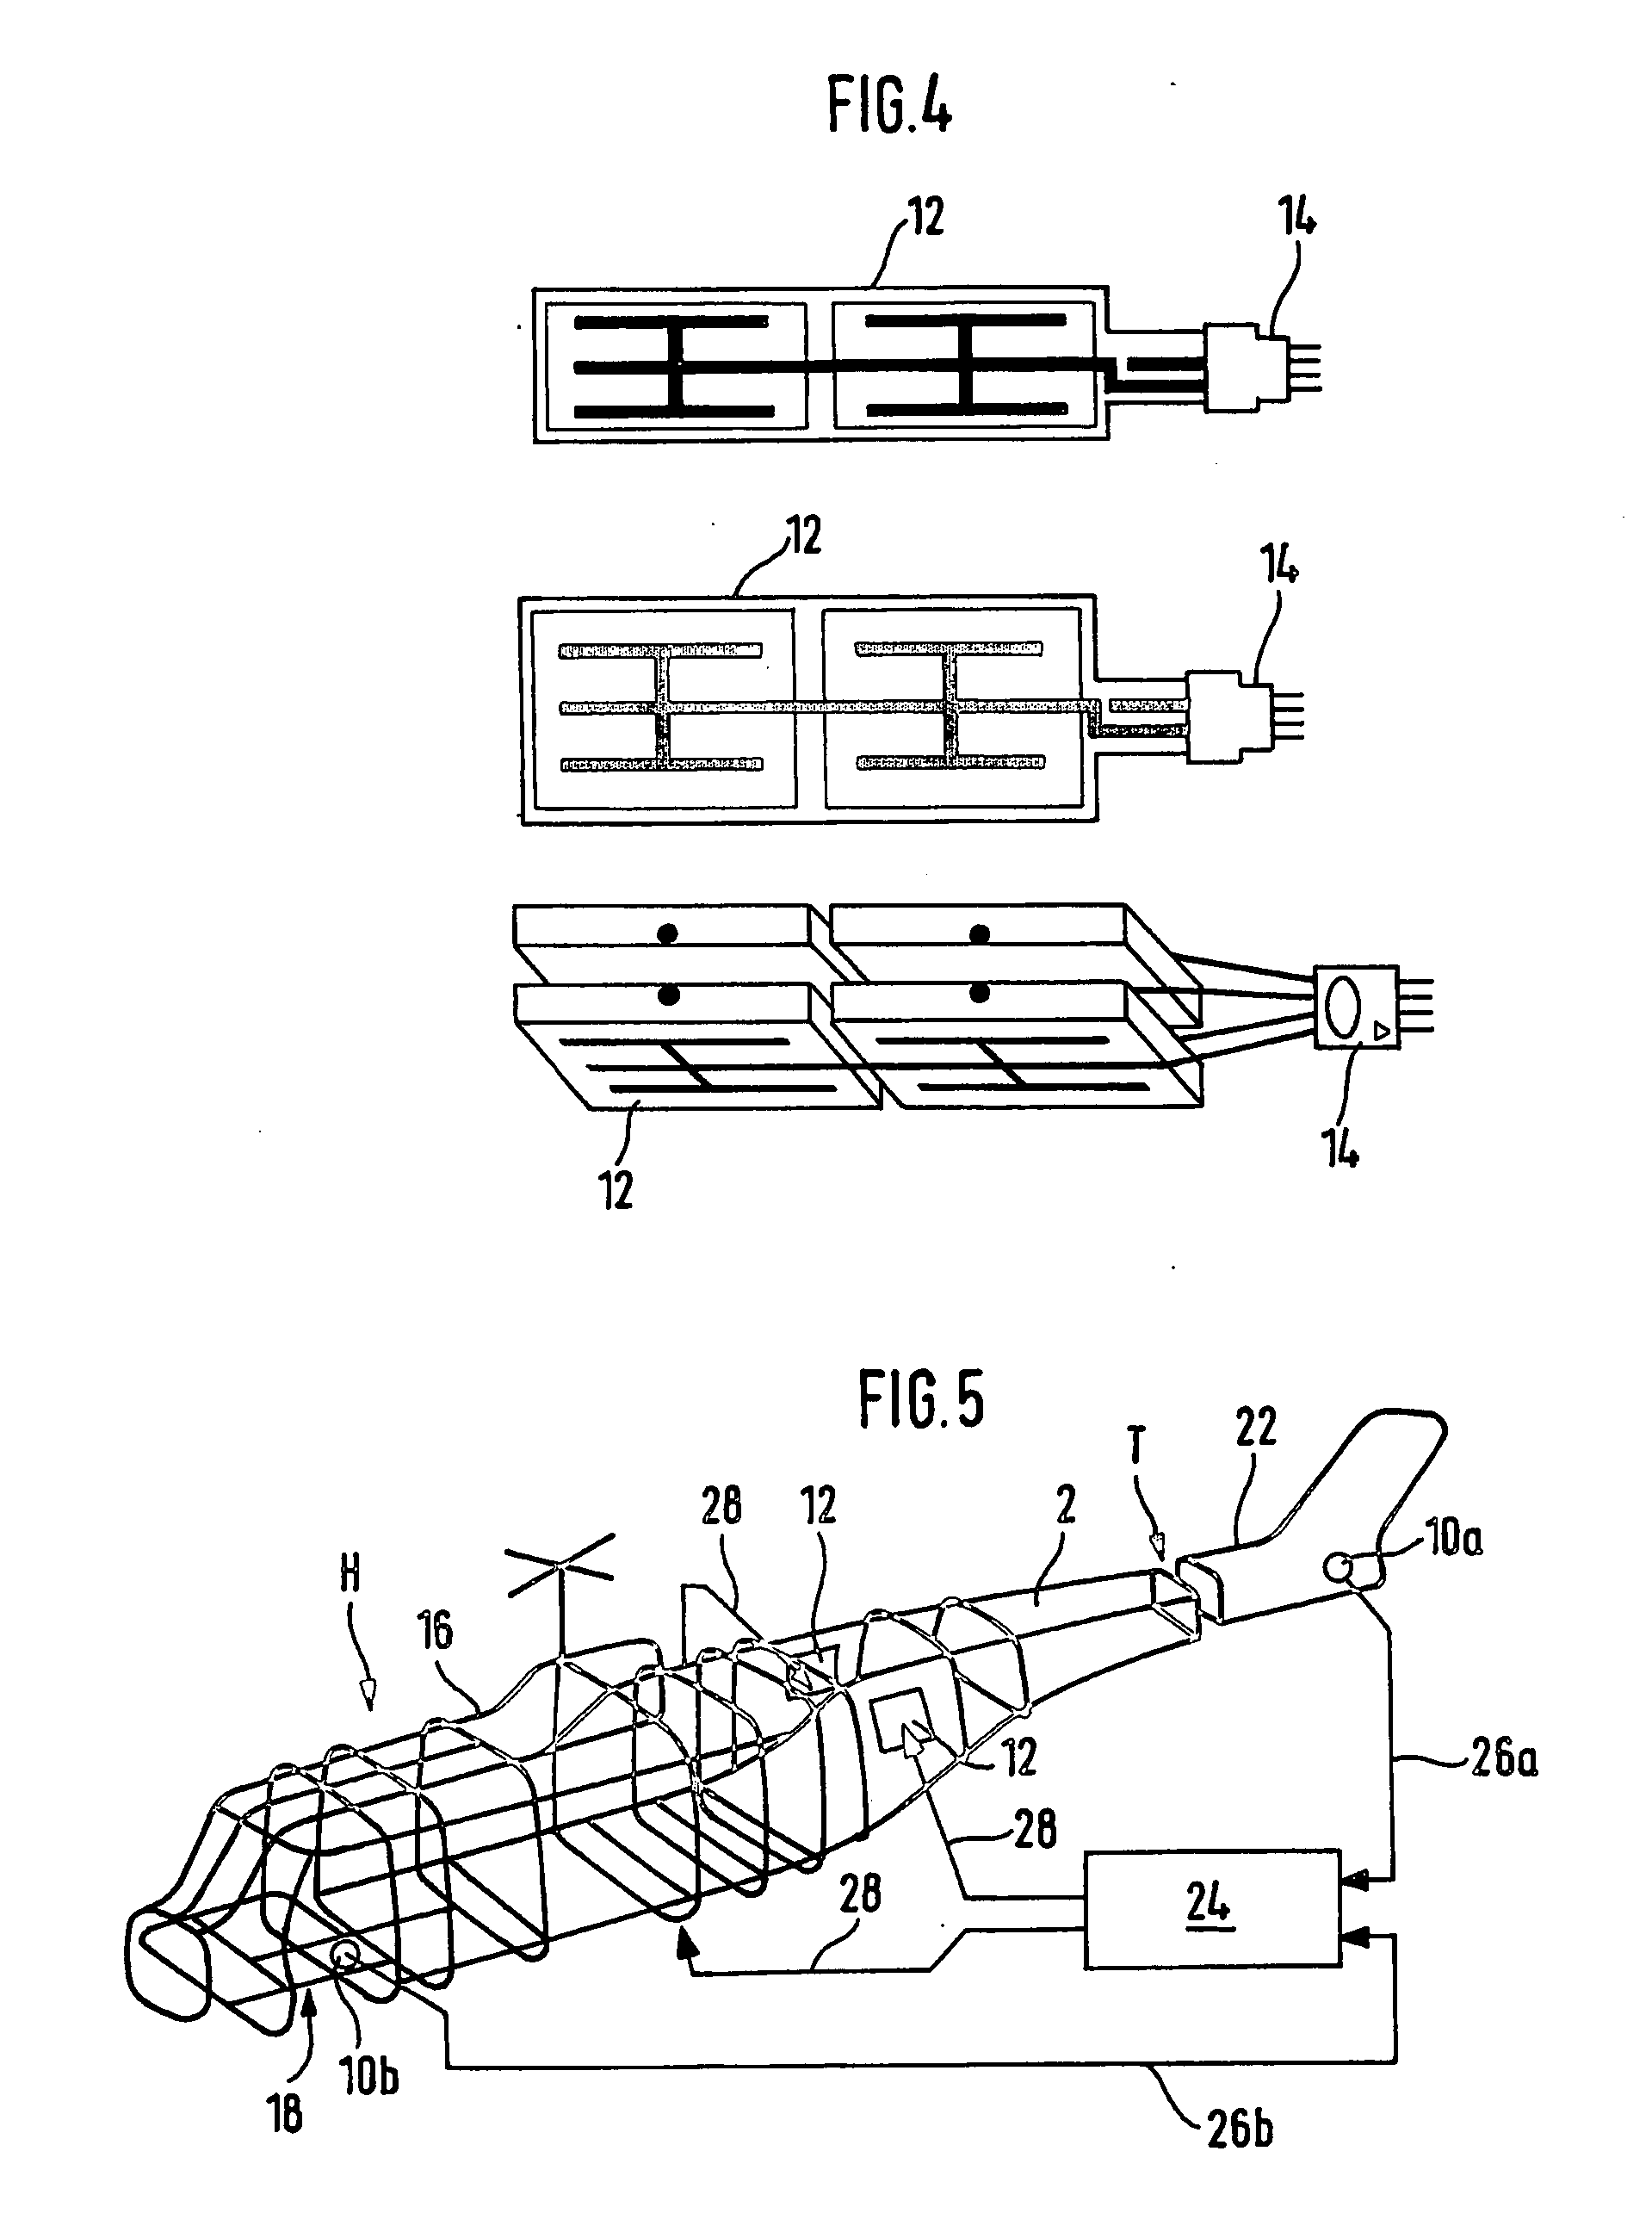 Method for damping rear extension arm vibrations of rotorcrafts and rotorcraft with a rear extension arm vibration damping device